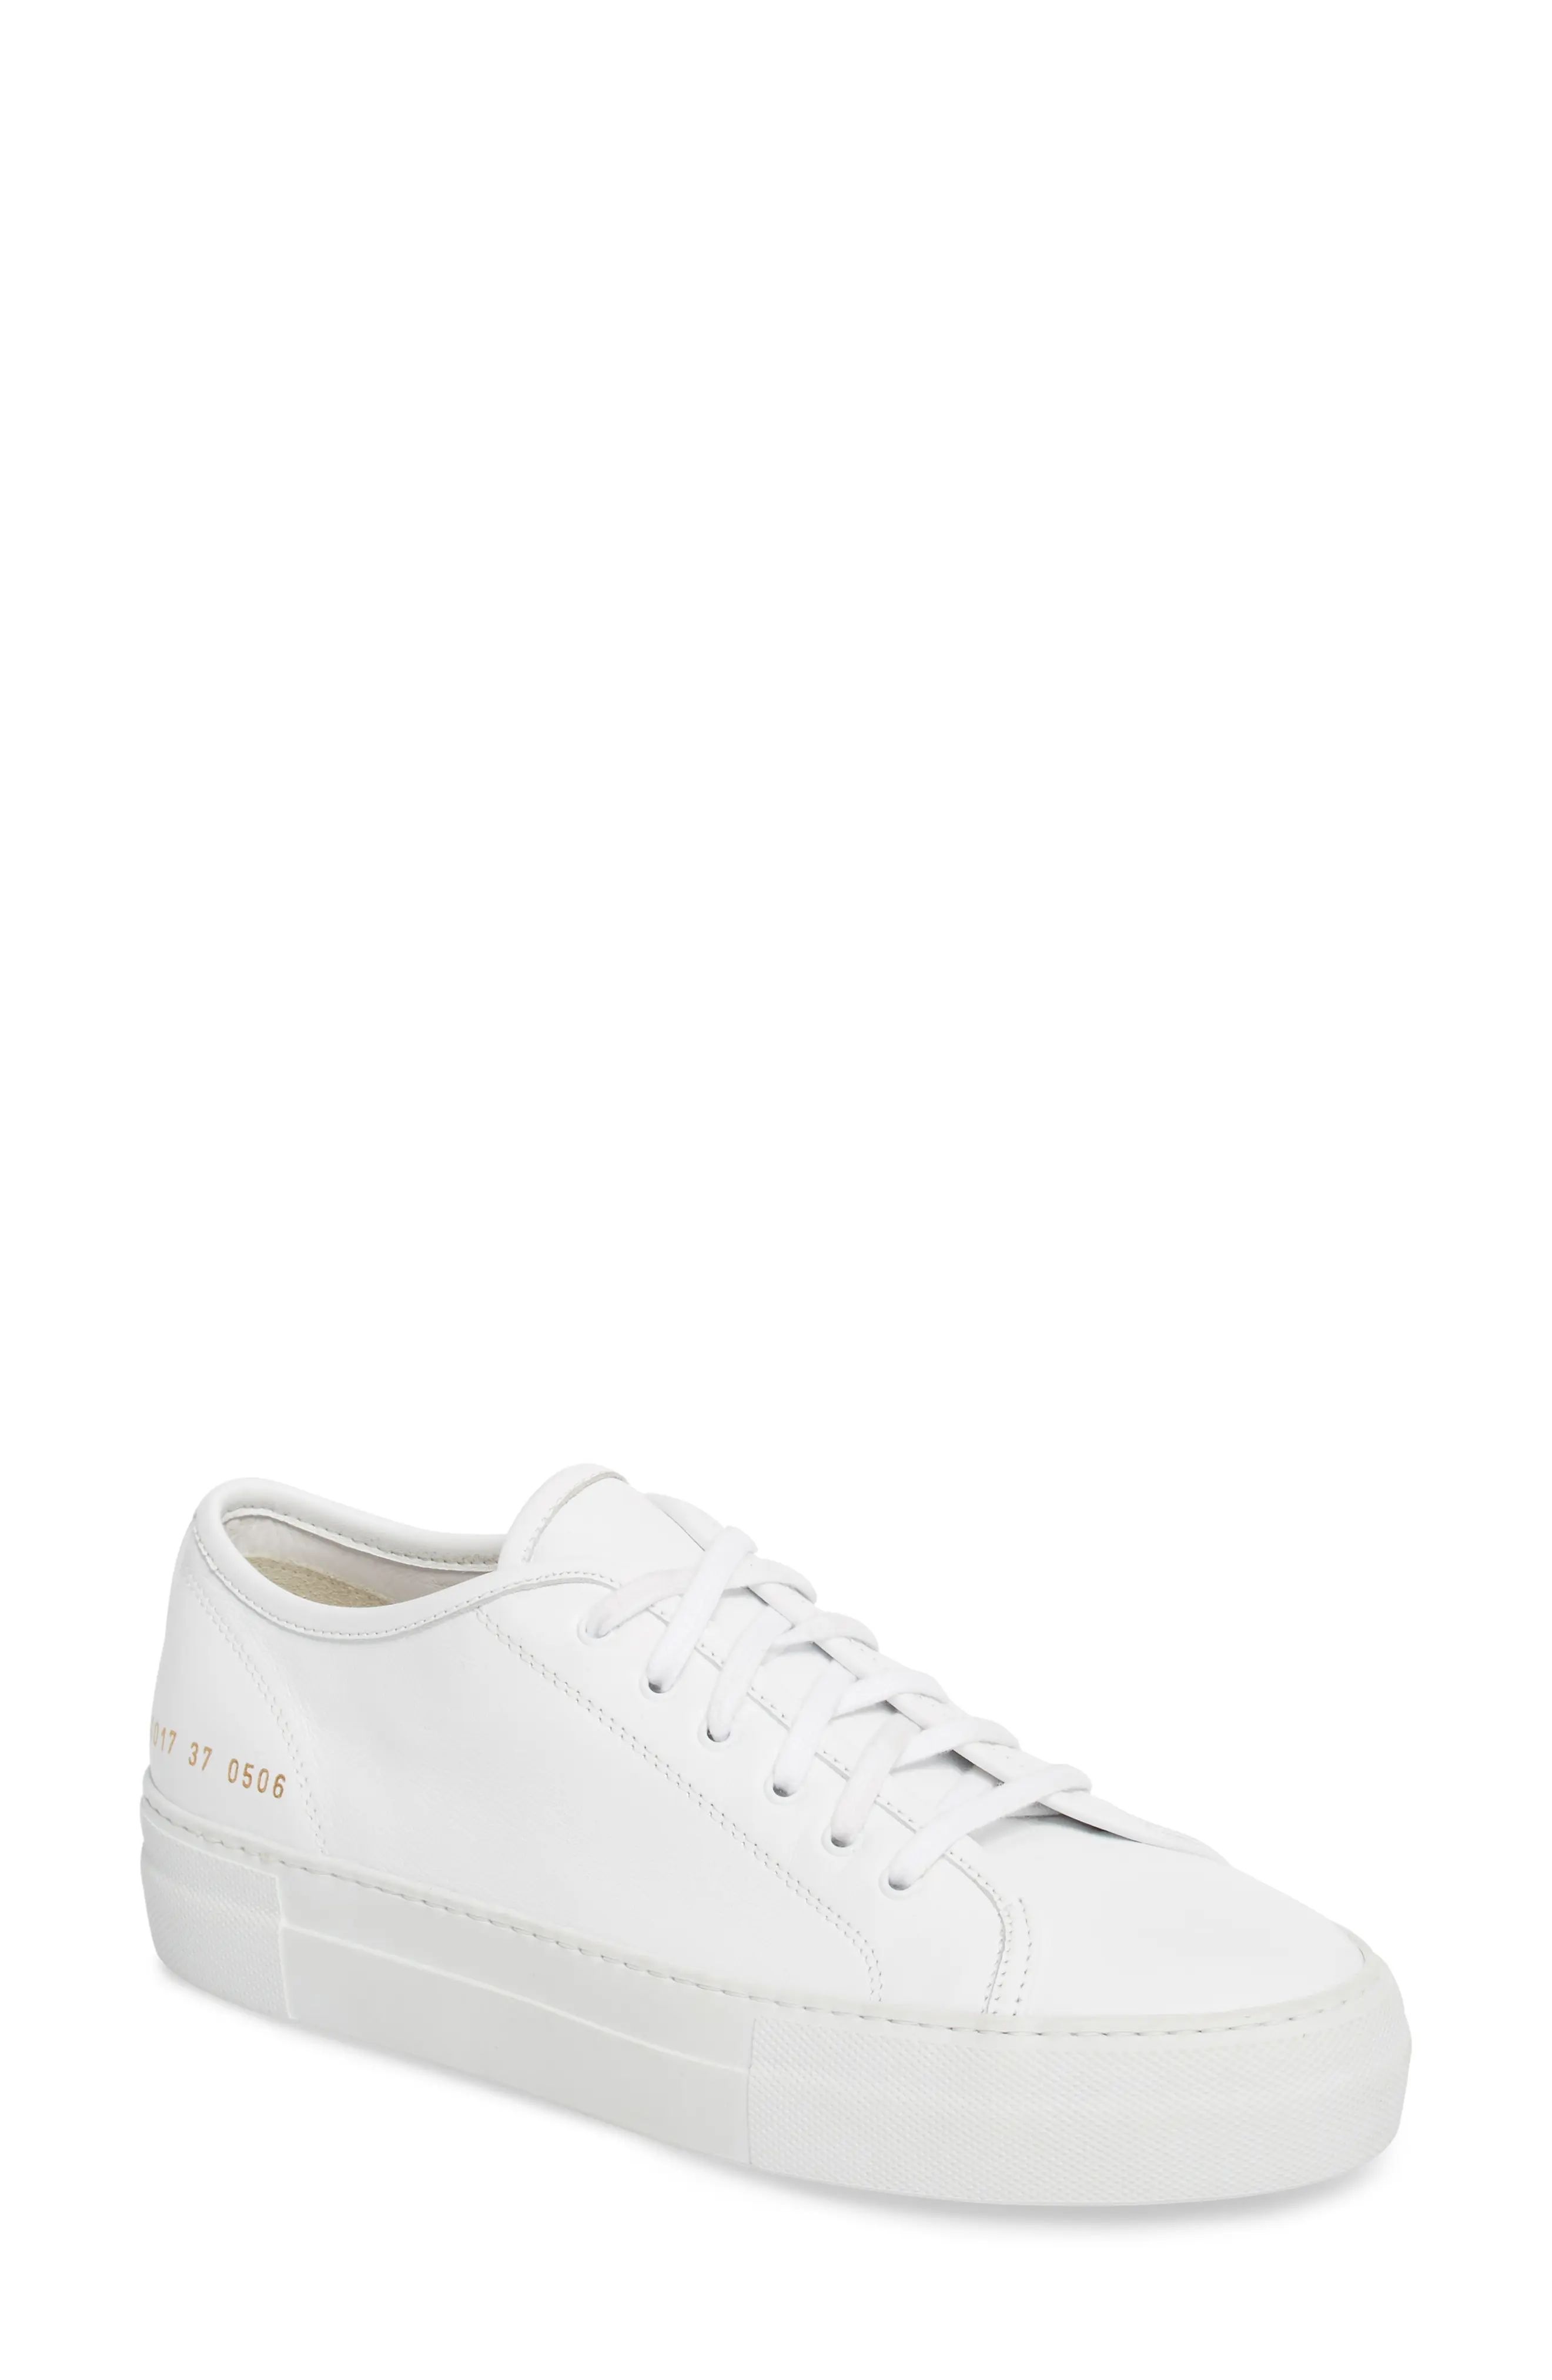 Women's Common Projects Tournament Low Top Sneaker, Size 11US - White | Nordstrom